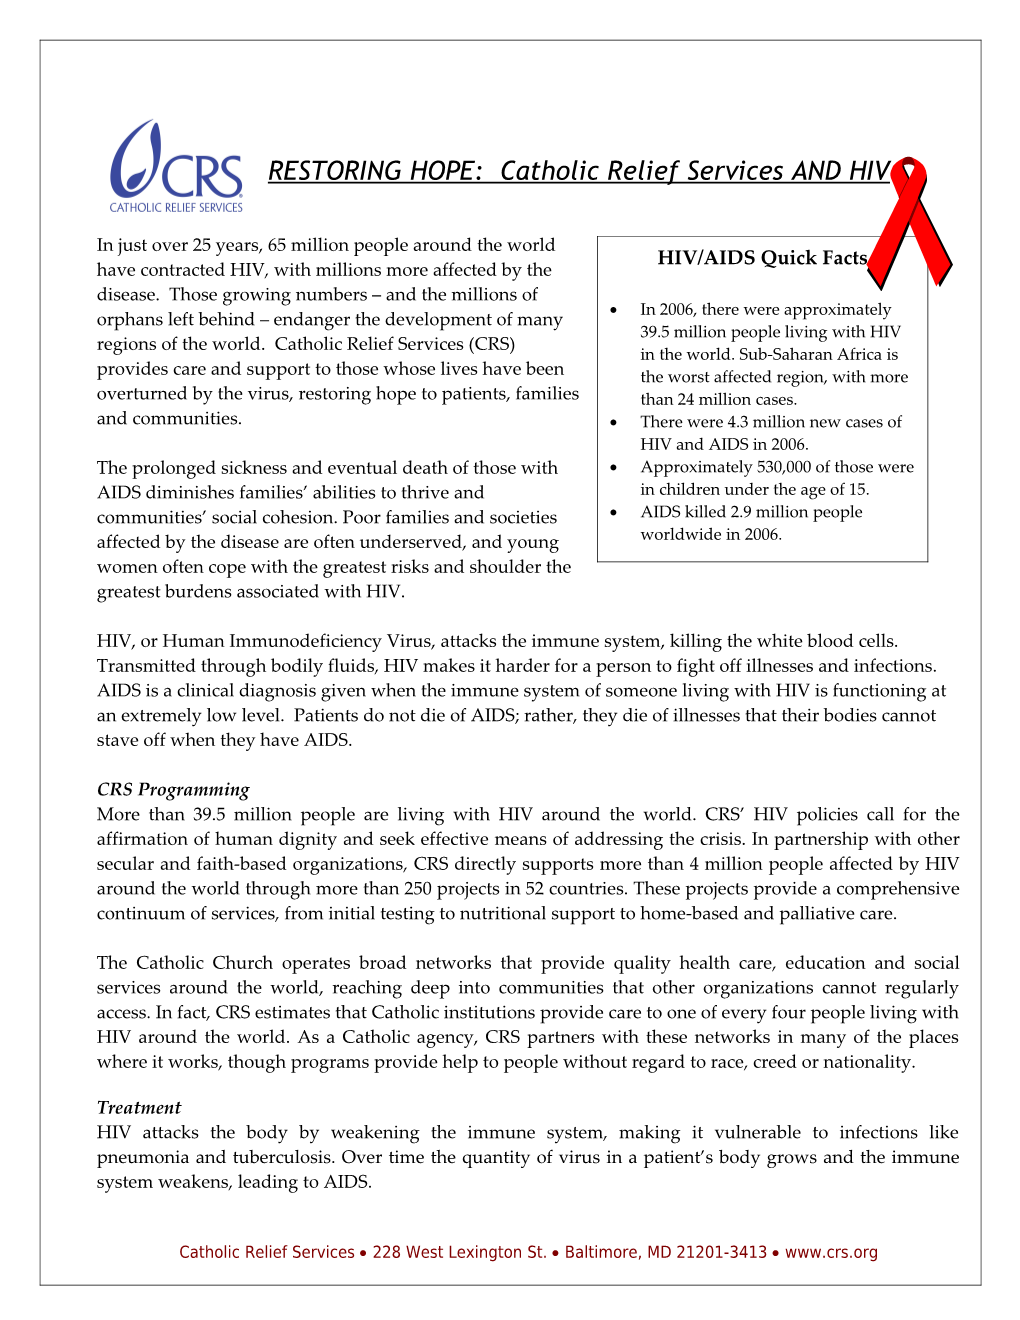 RESTORING HOPE: Catholic Relief Services and HIV